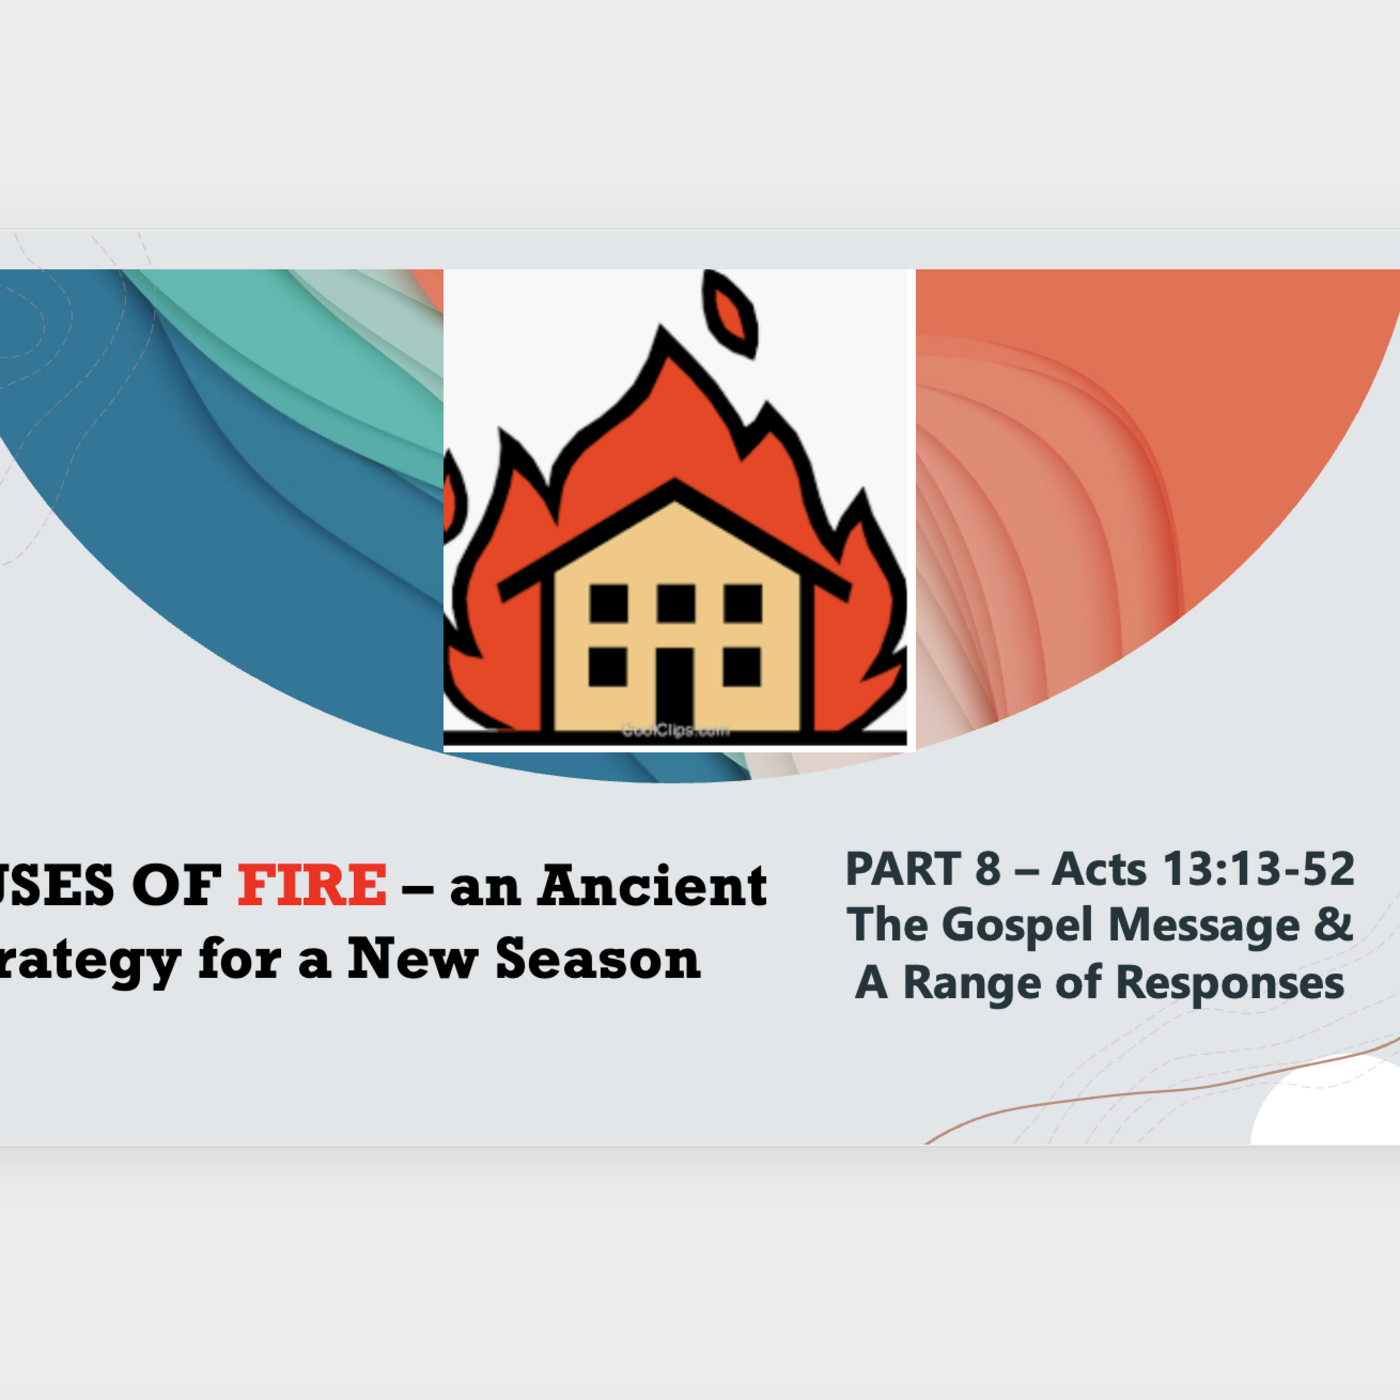 Episode 156: Houses of Fire - Part 8 - The Gospel Message and a Range of Responses (Acts 13:13-52)